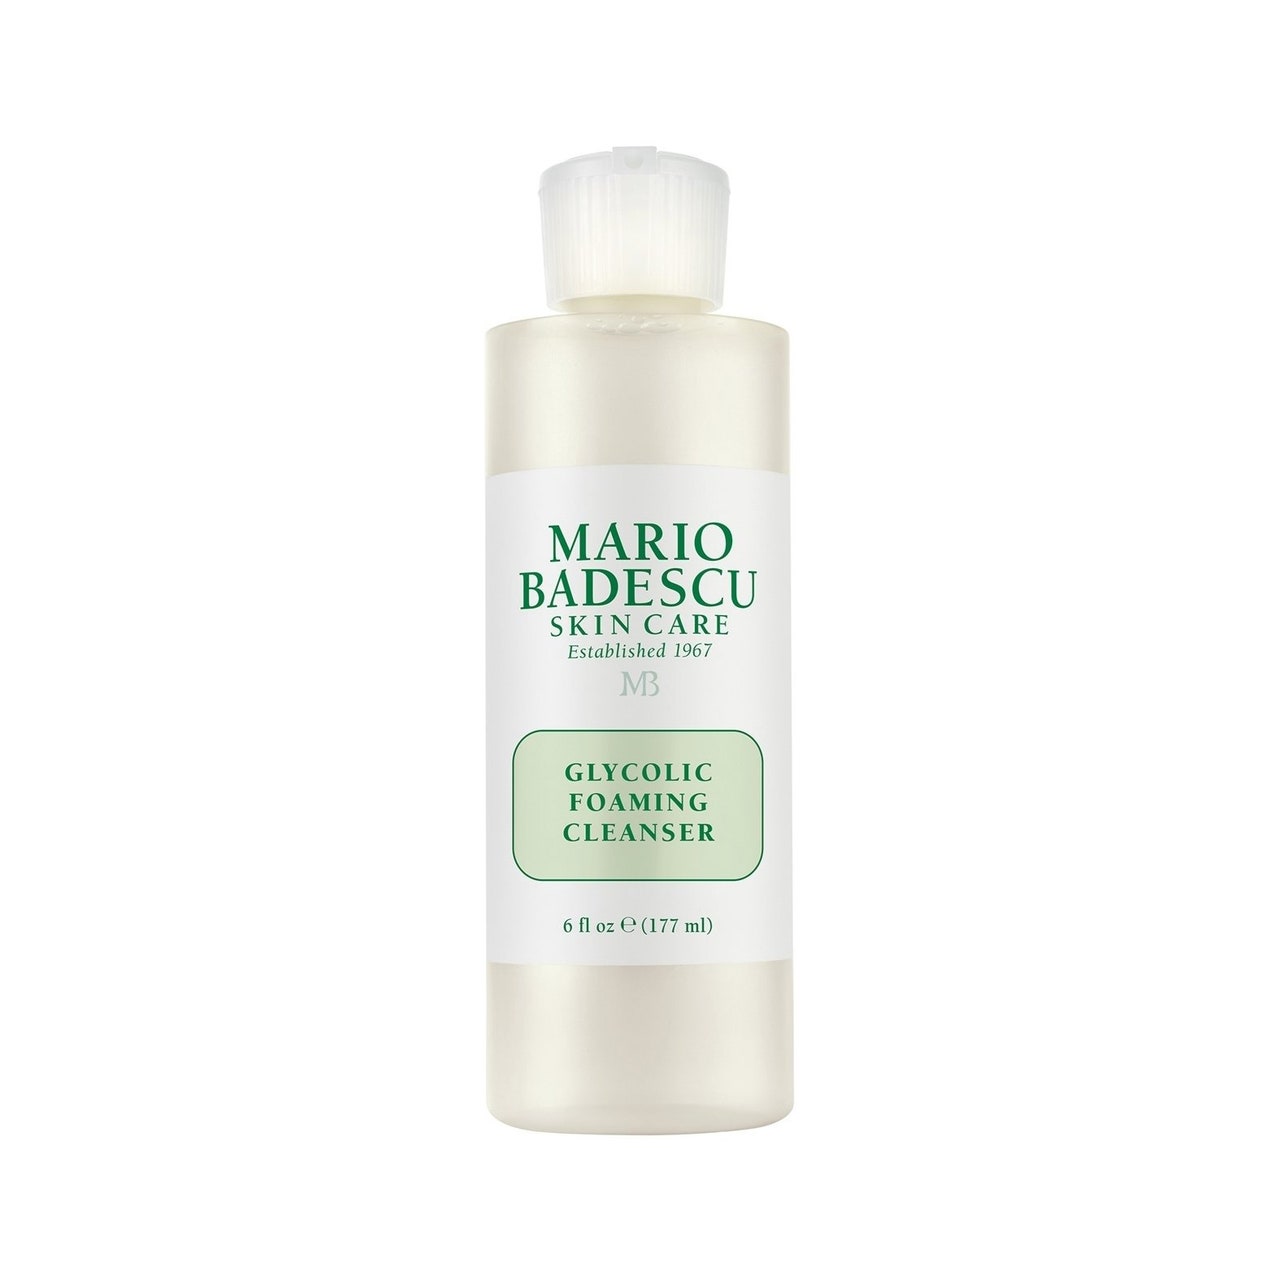 Mario Badescu Glycolic Foaming Cleanser translucent tube of cleanser with white and green label on white background